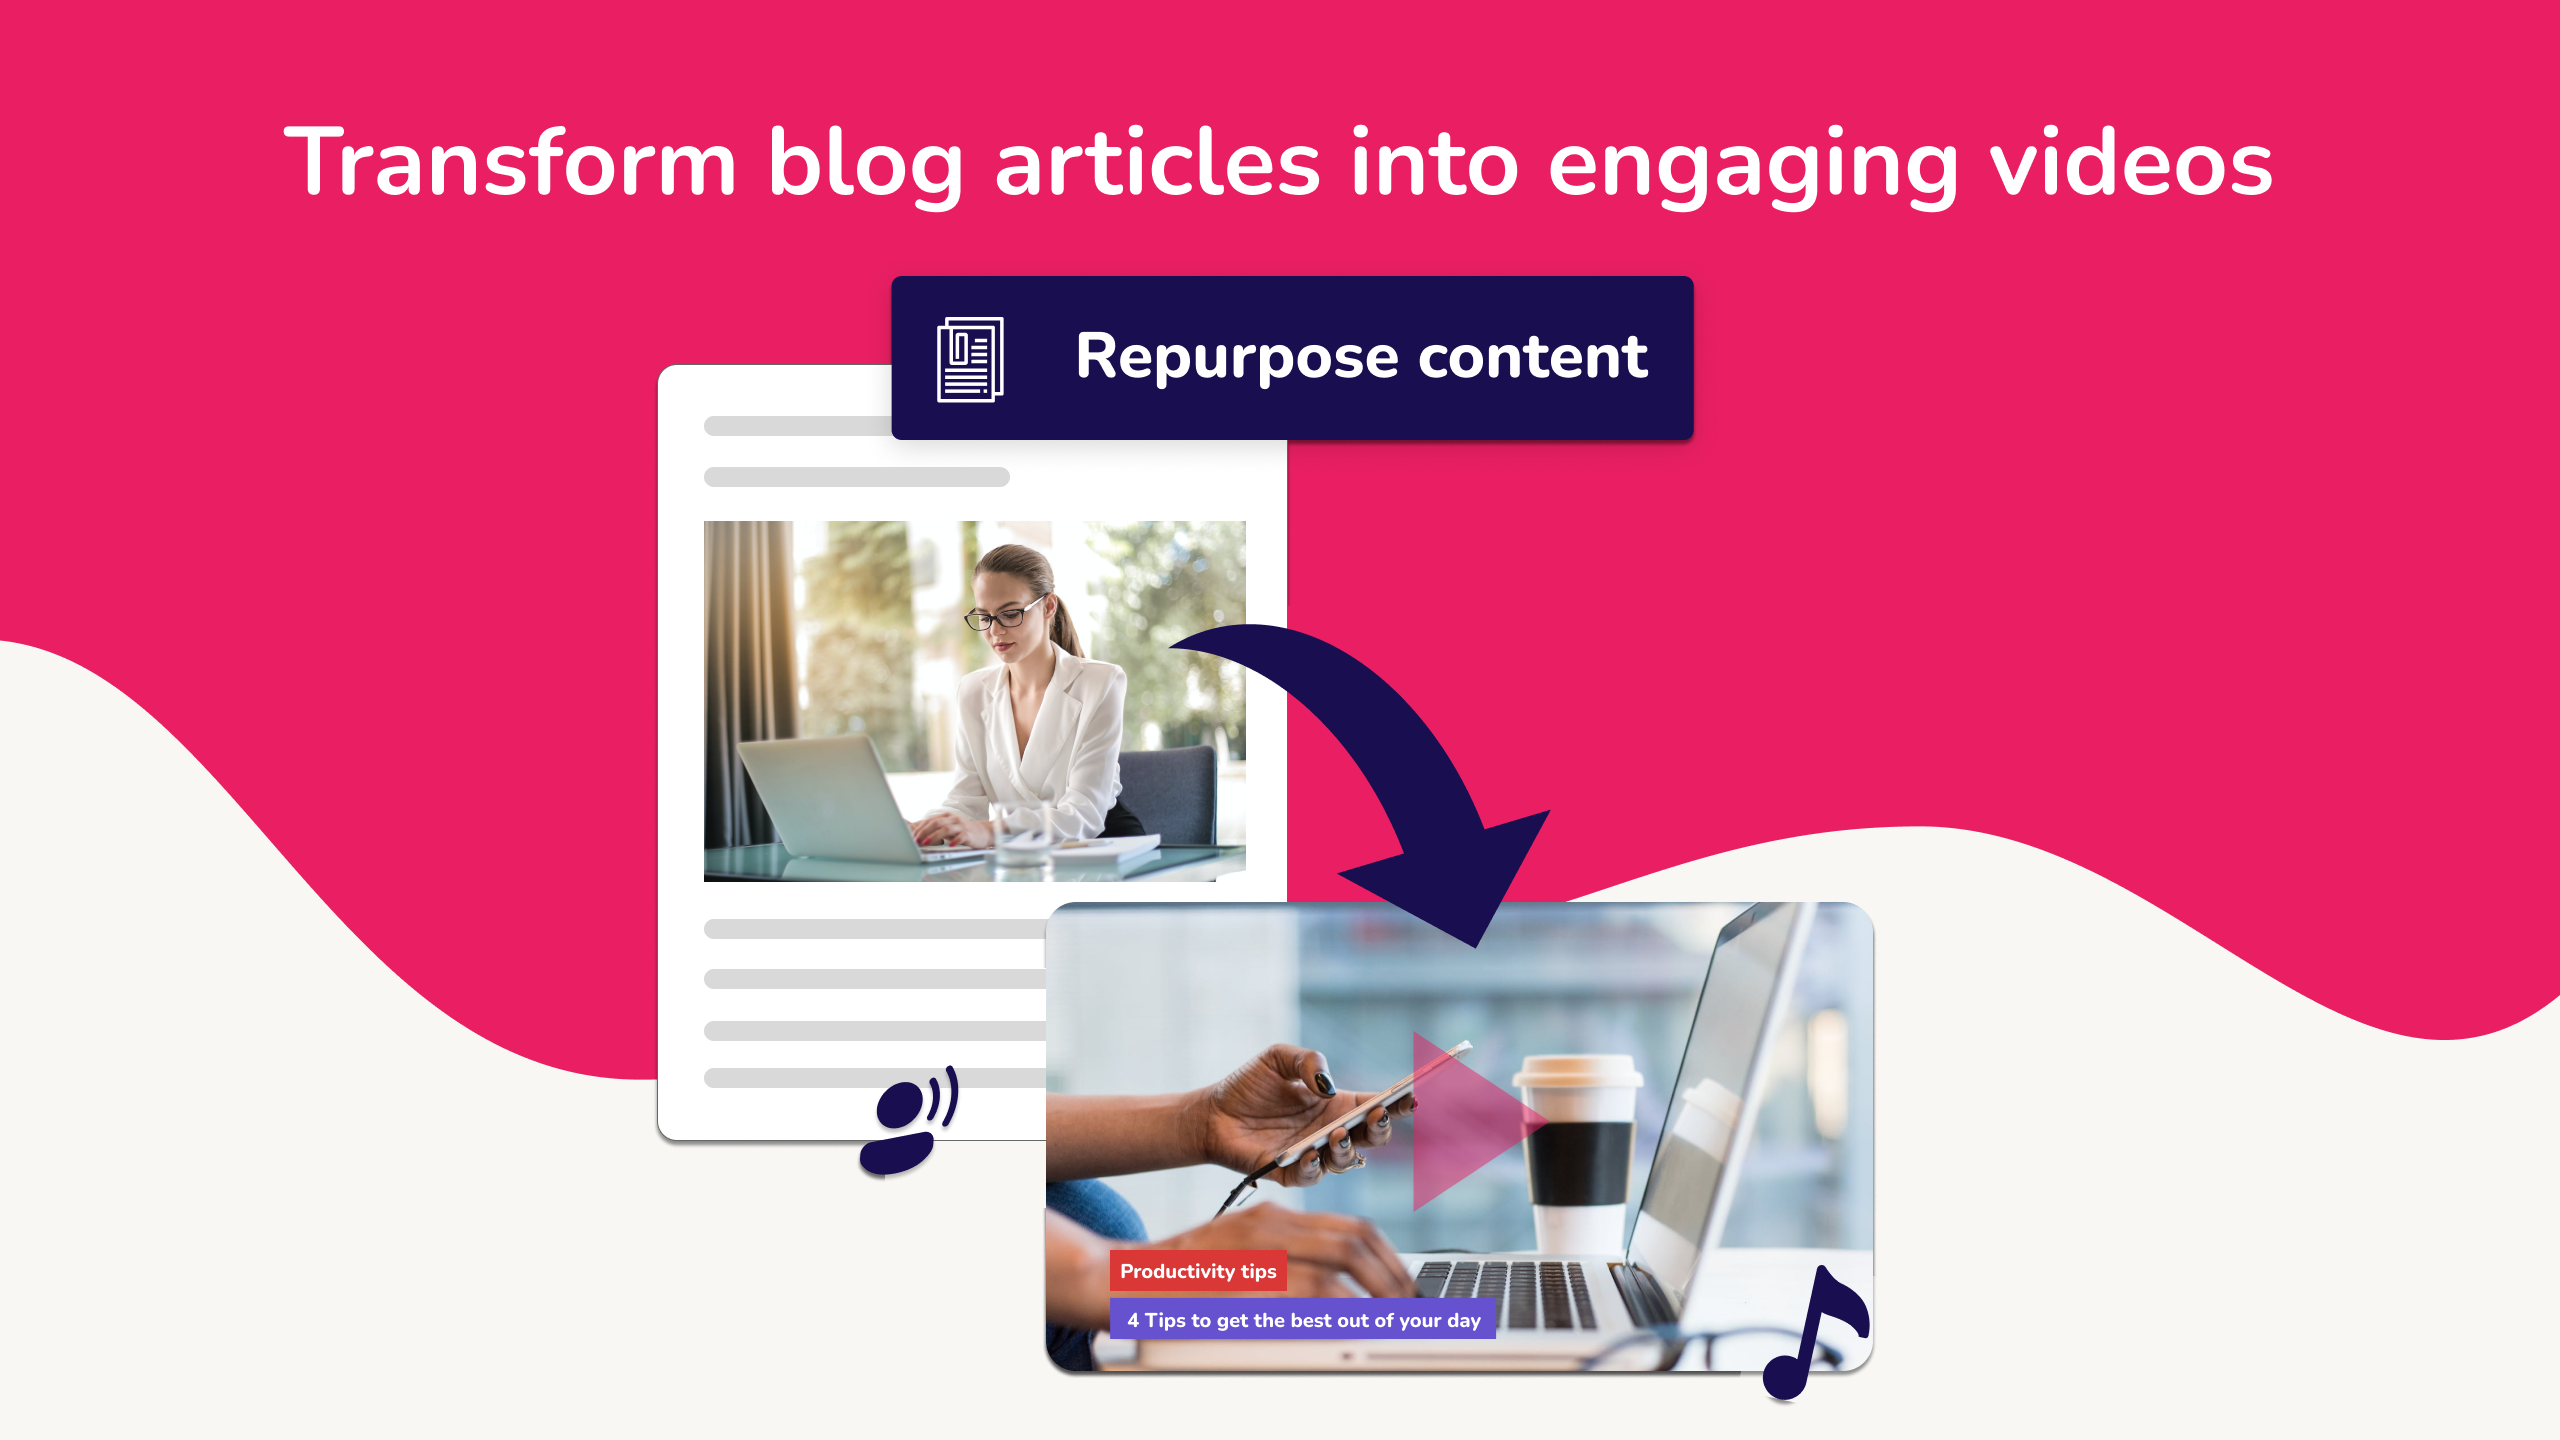 Fliki shows how to transform blog articles into engaging videos with artificial intelligence